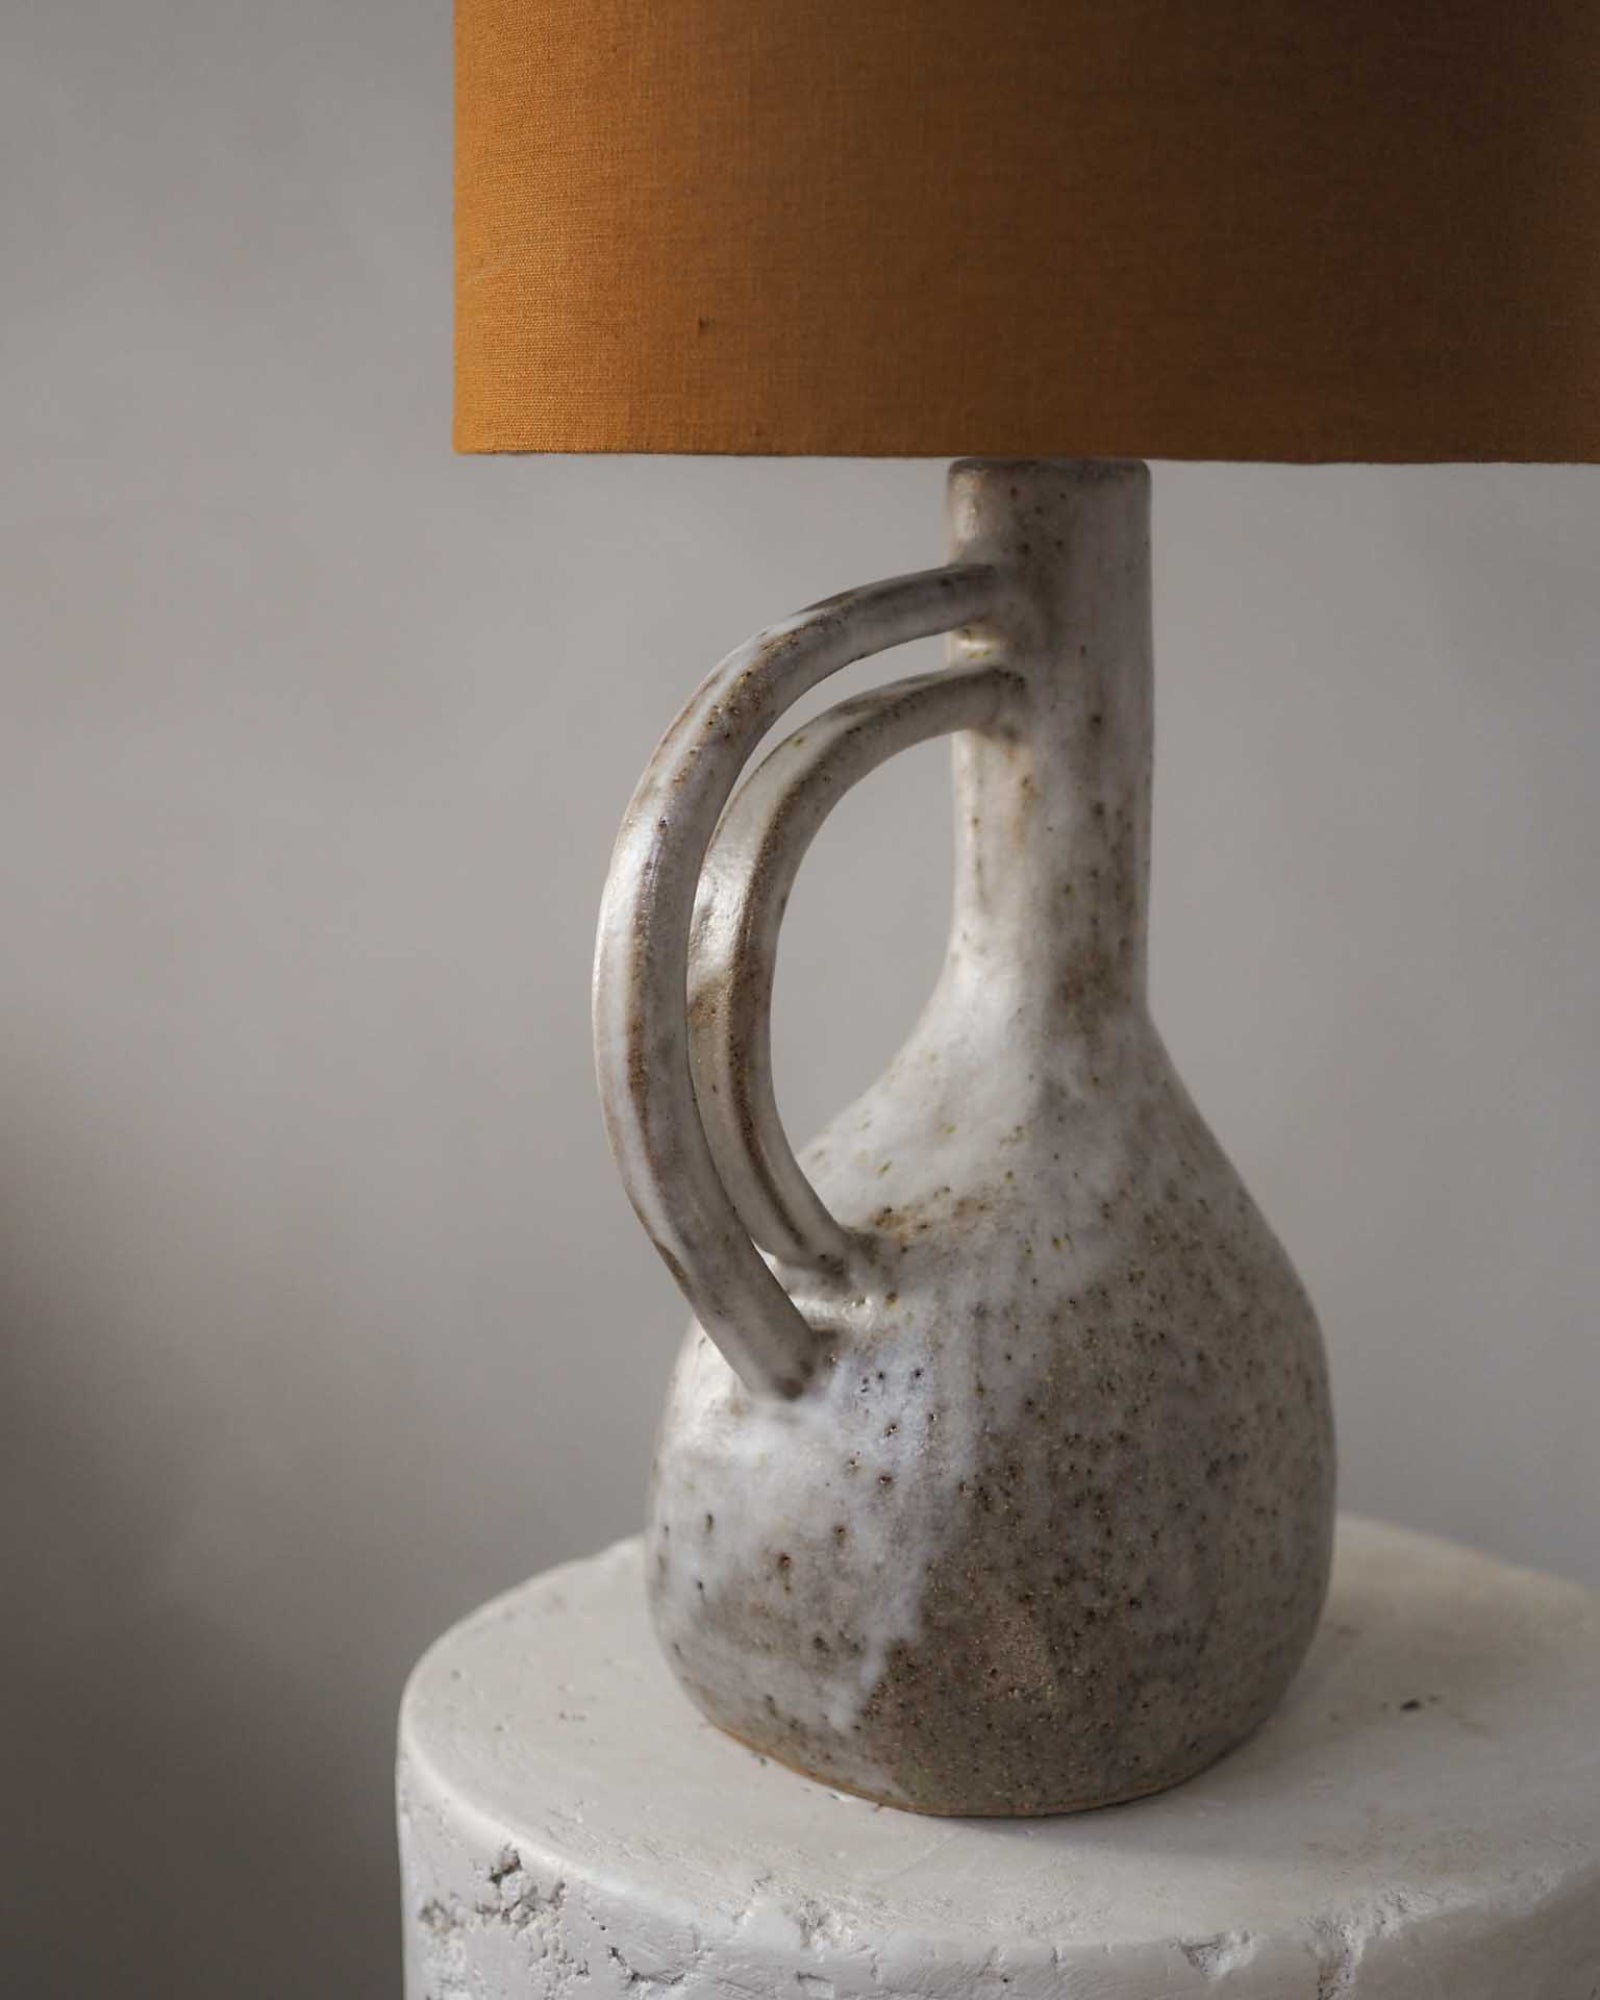 Alby Table Lamp